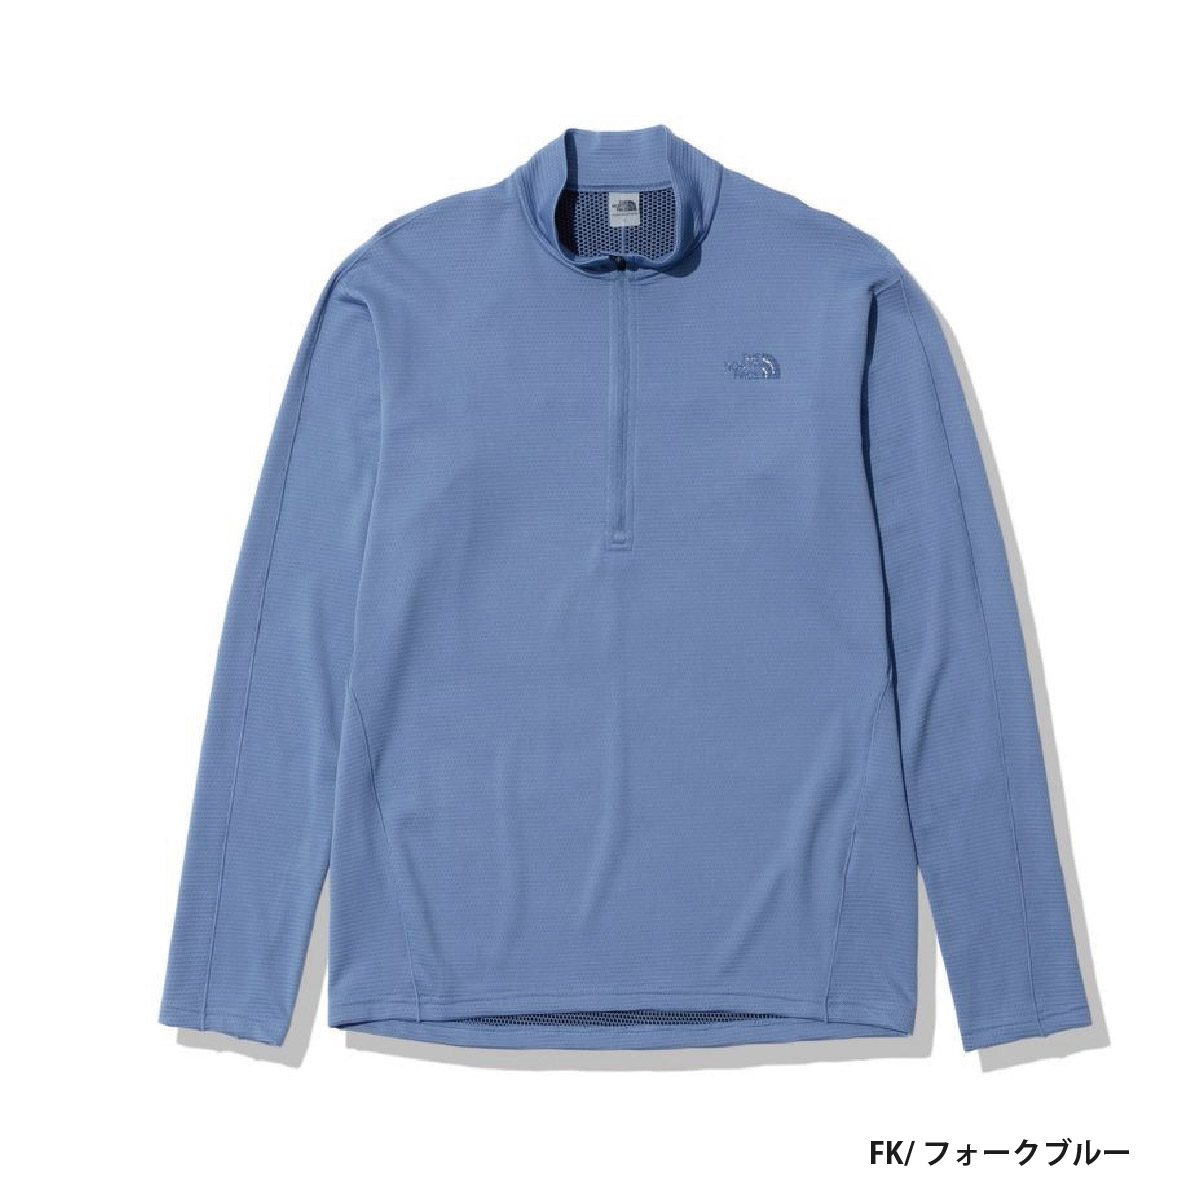 THE NORTH FACE The * North Face нижний одежда мужской <2023> L/S FlashDry Zip Up / L/S flash dry Zip выше / NT61911